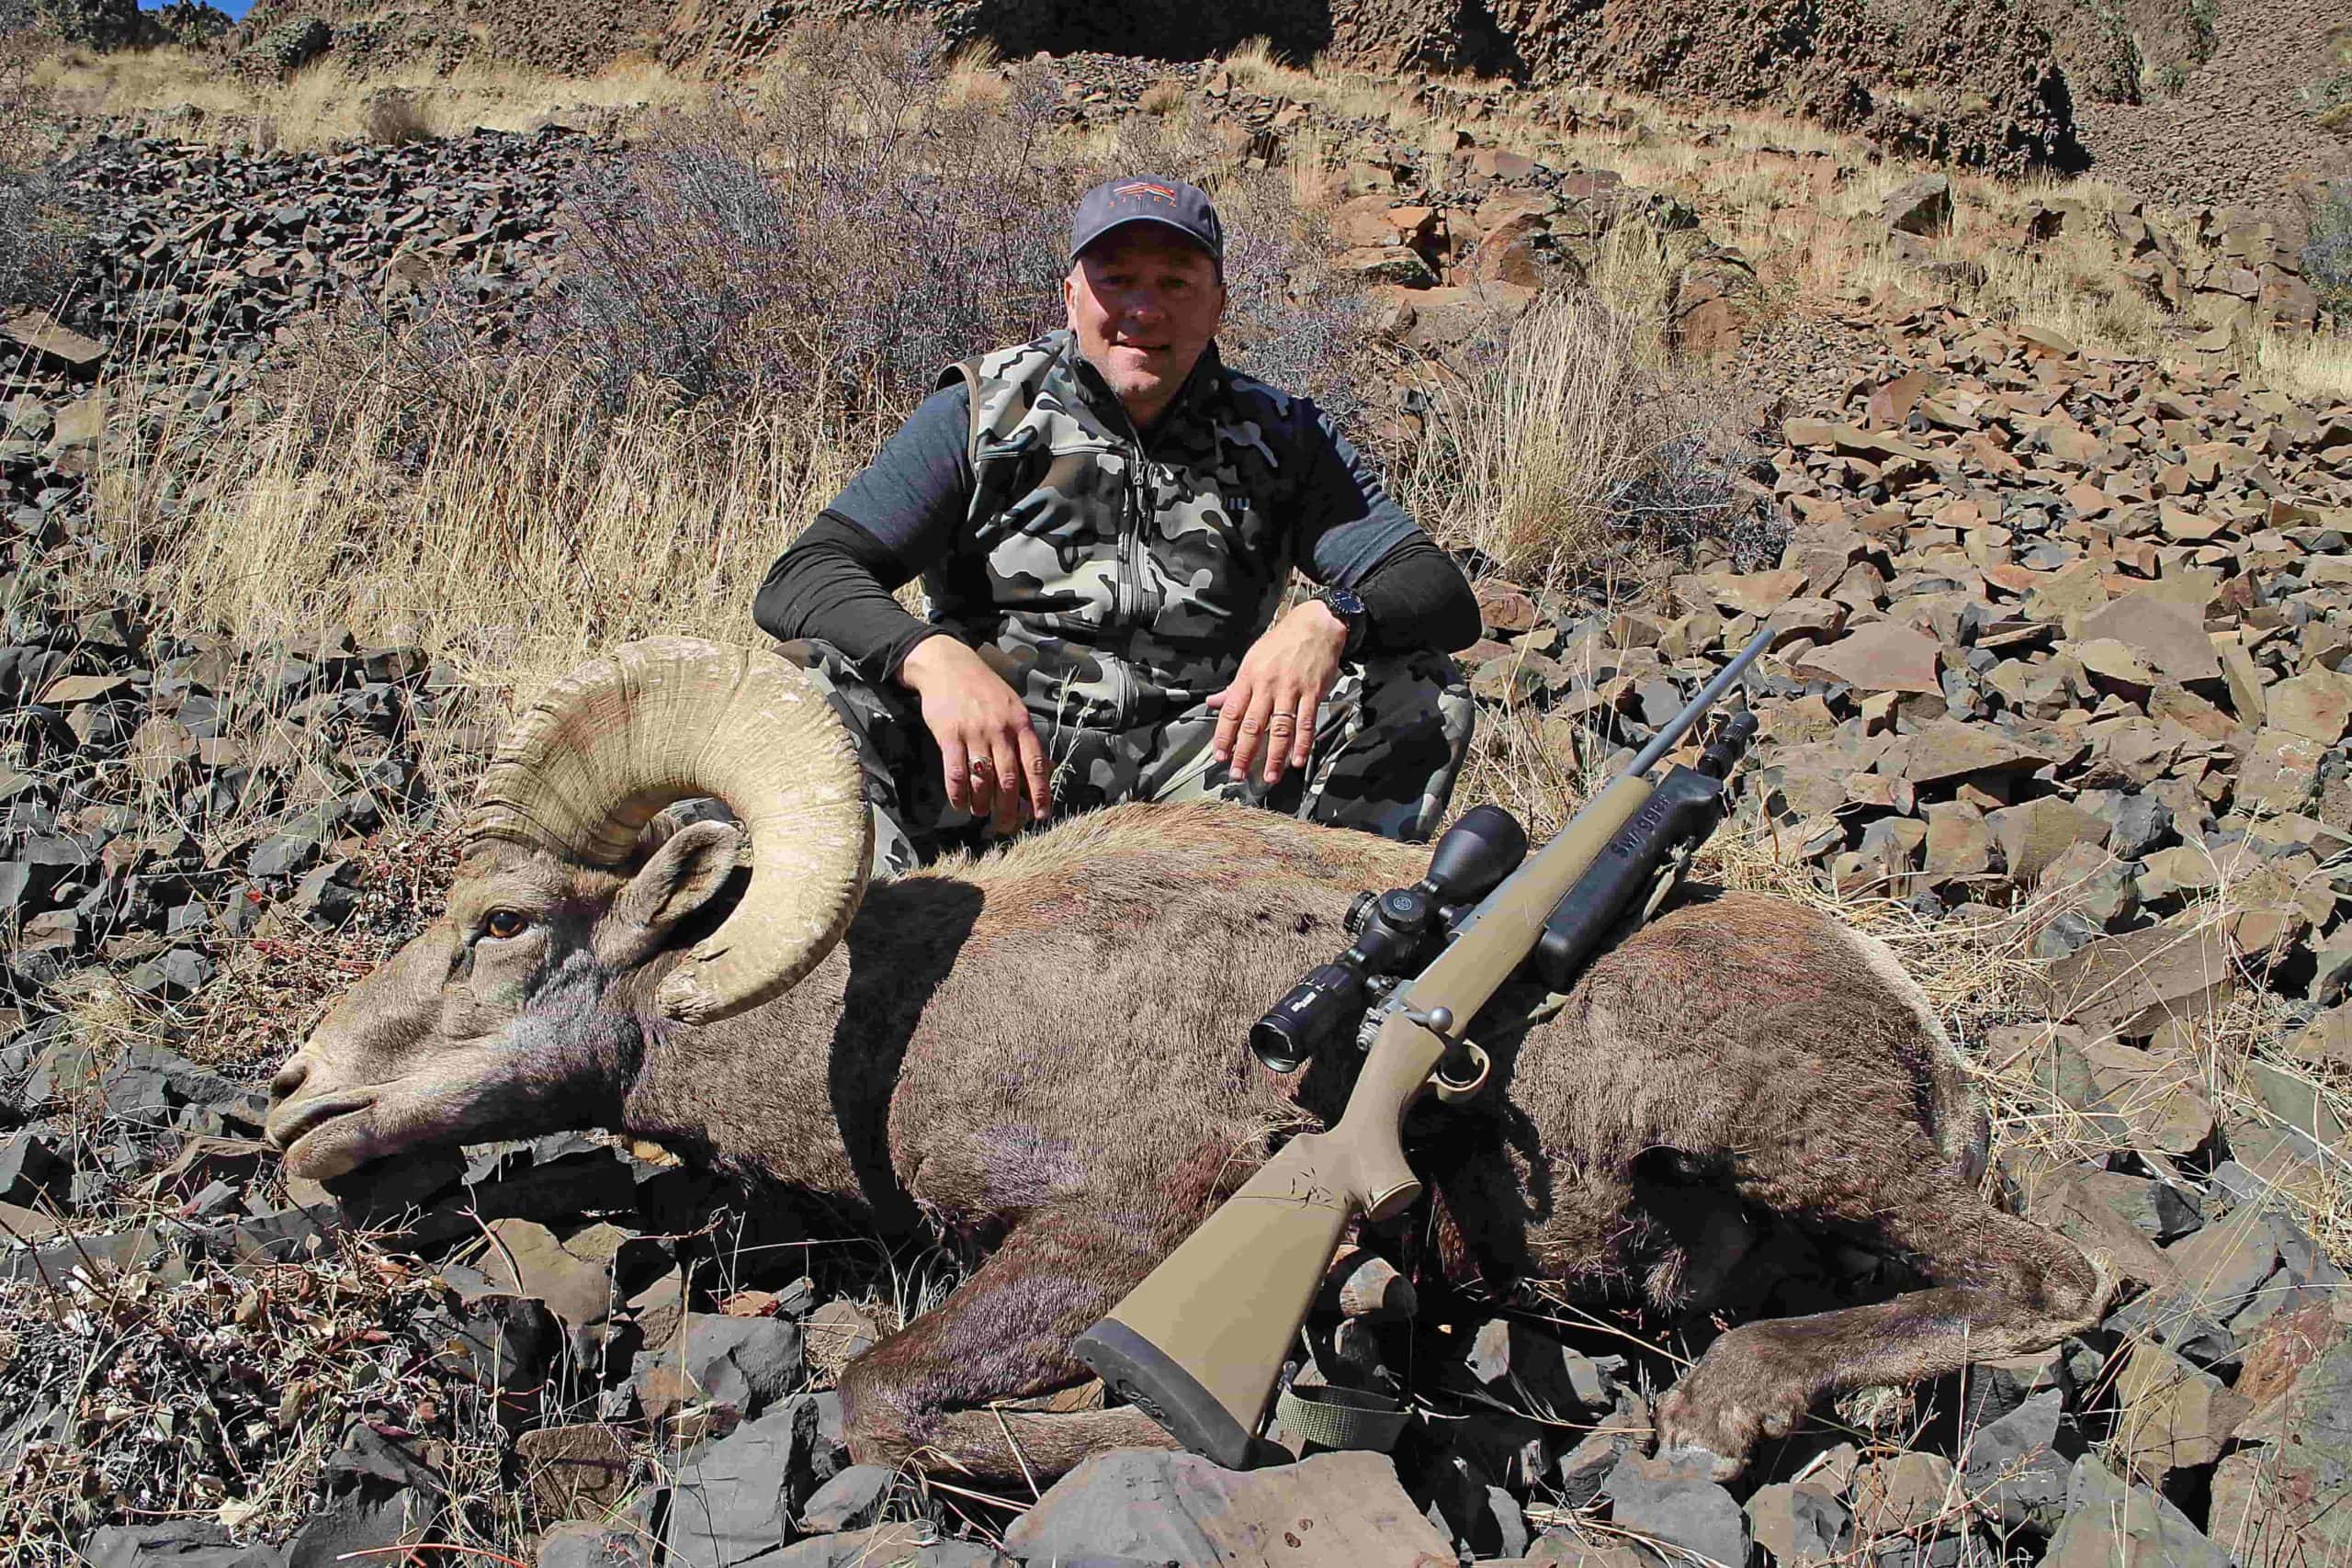 A person in camo gear with a bighorn sheep and a rifle